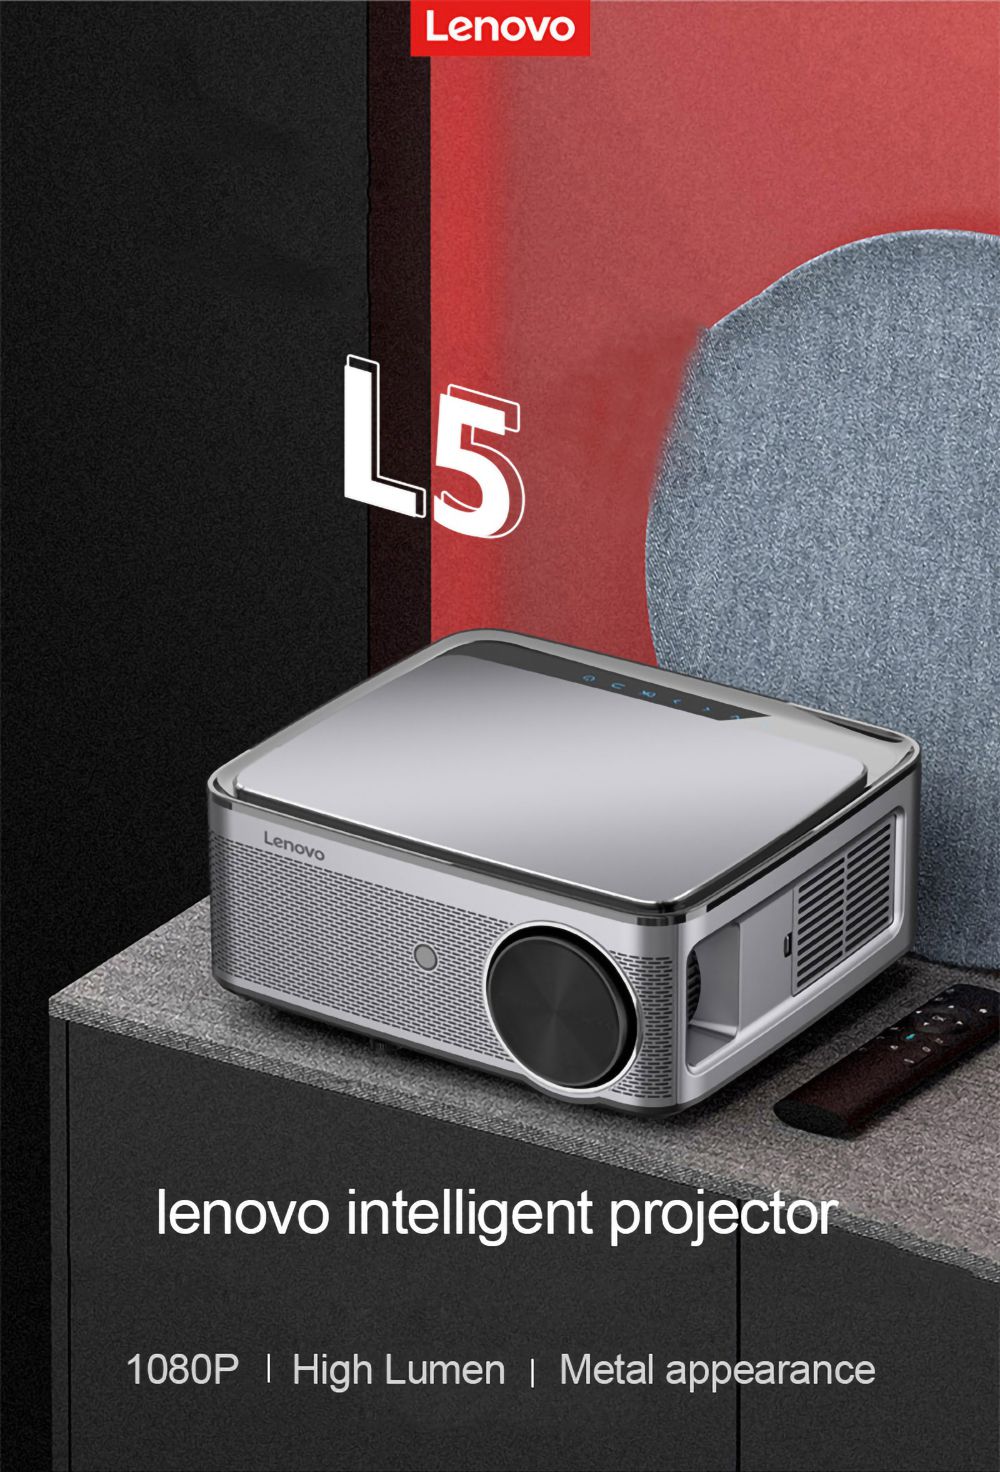 Global Version Lenovo L5 Smart LED WIFI Projector Android TV System 450 ANSI Lumens 1080P Native Resolution